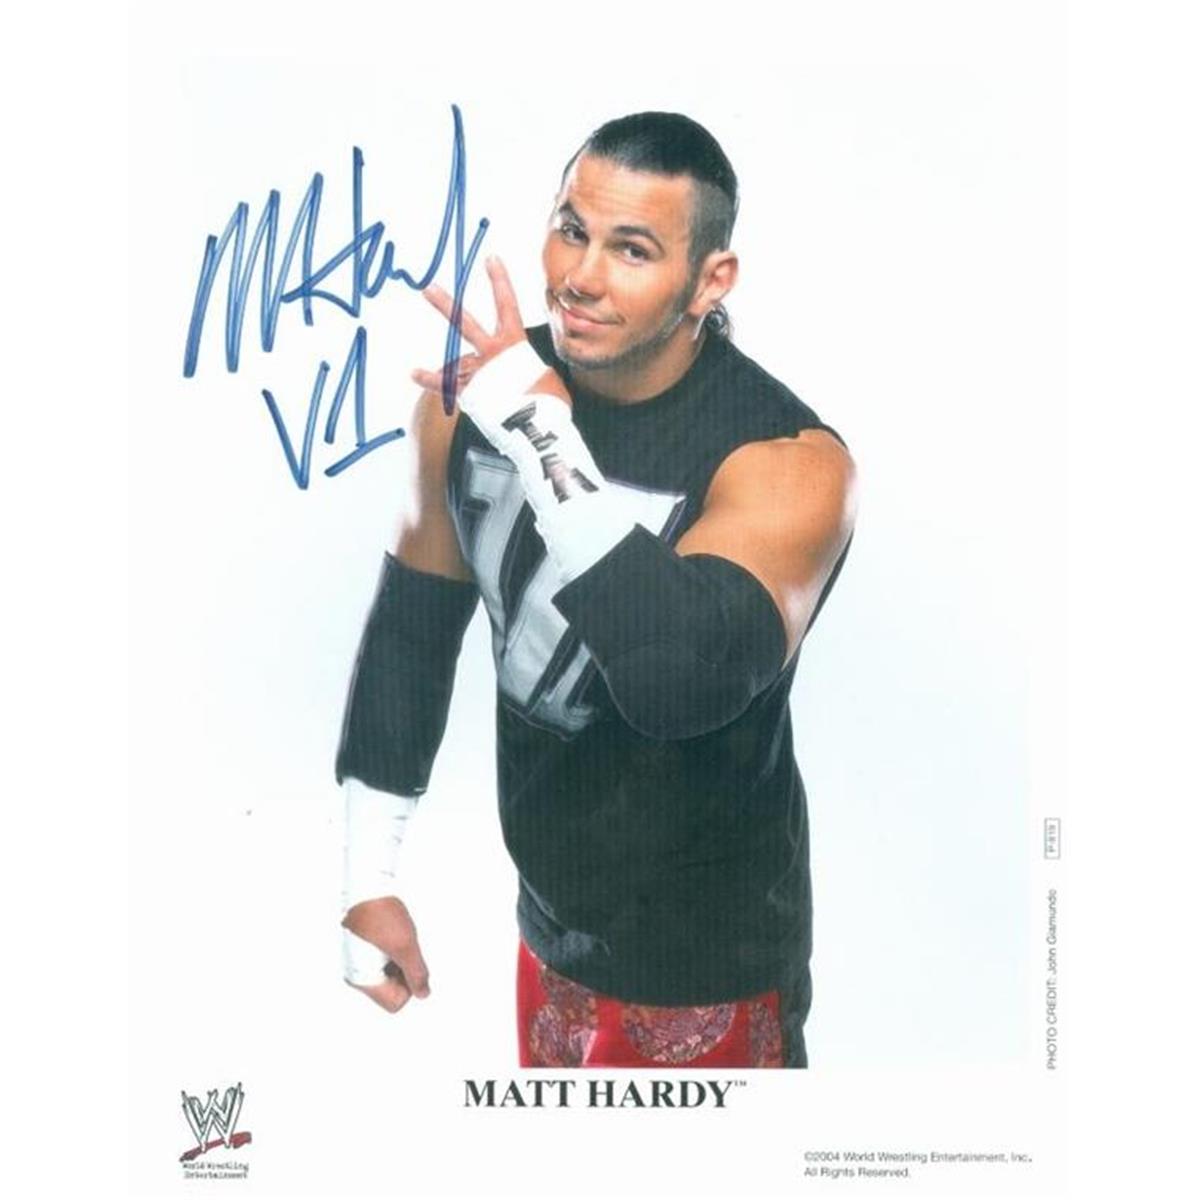 465012 8 x 10 in. Matt Hardy Autographed Photo No. 1 for Wrestling, WWE -  Autograph Warehouse